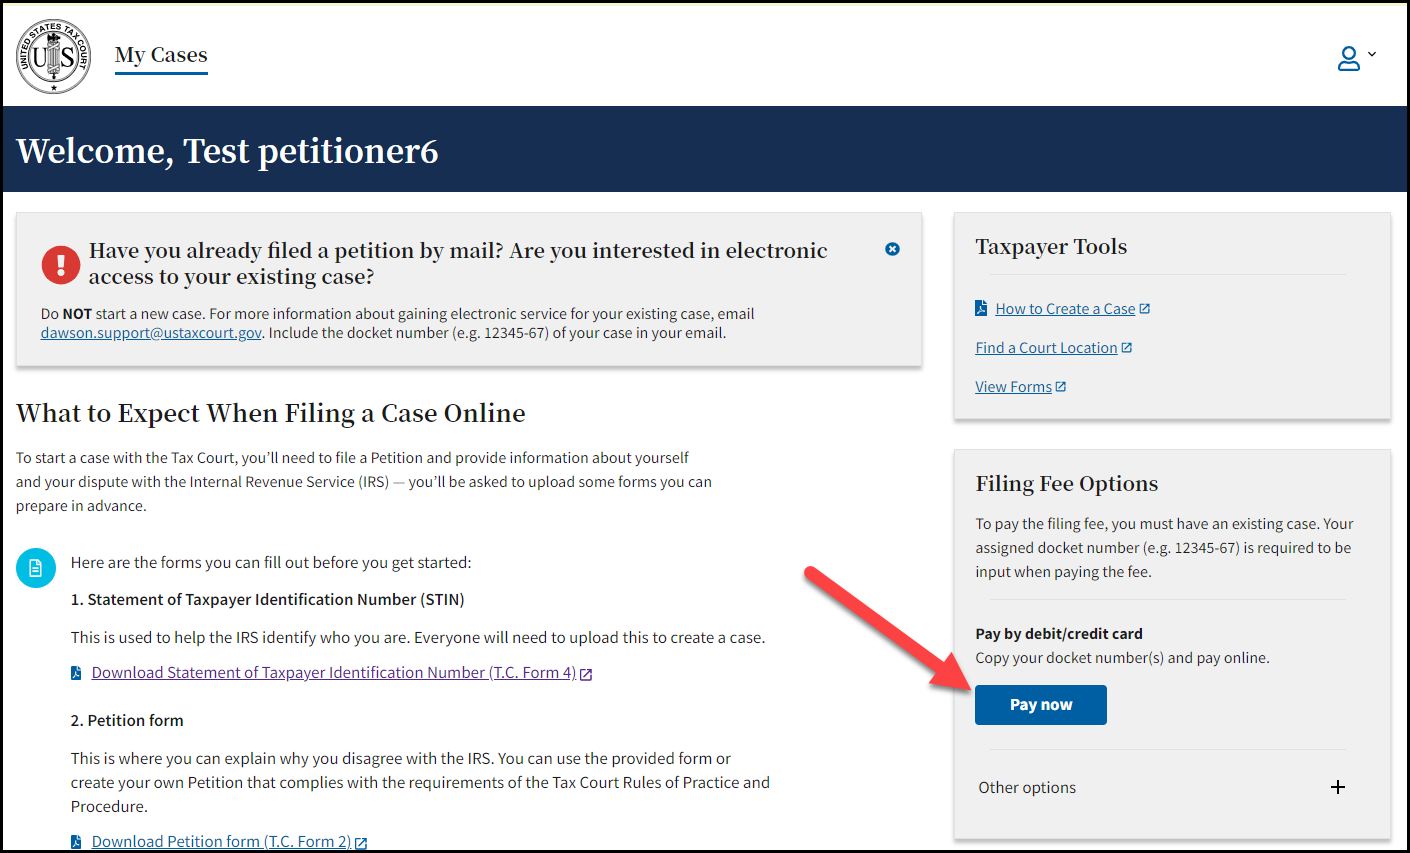 How to Pay the Filing Fee United States Tax Court